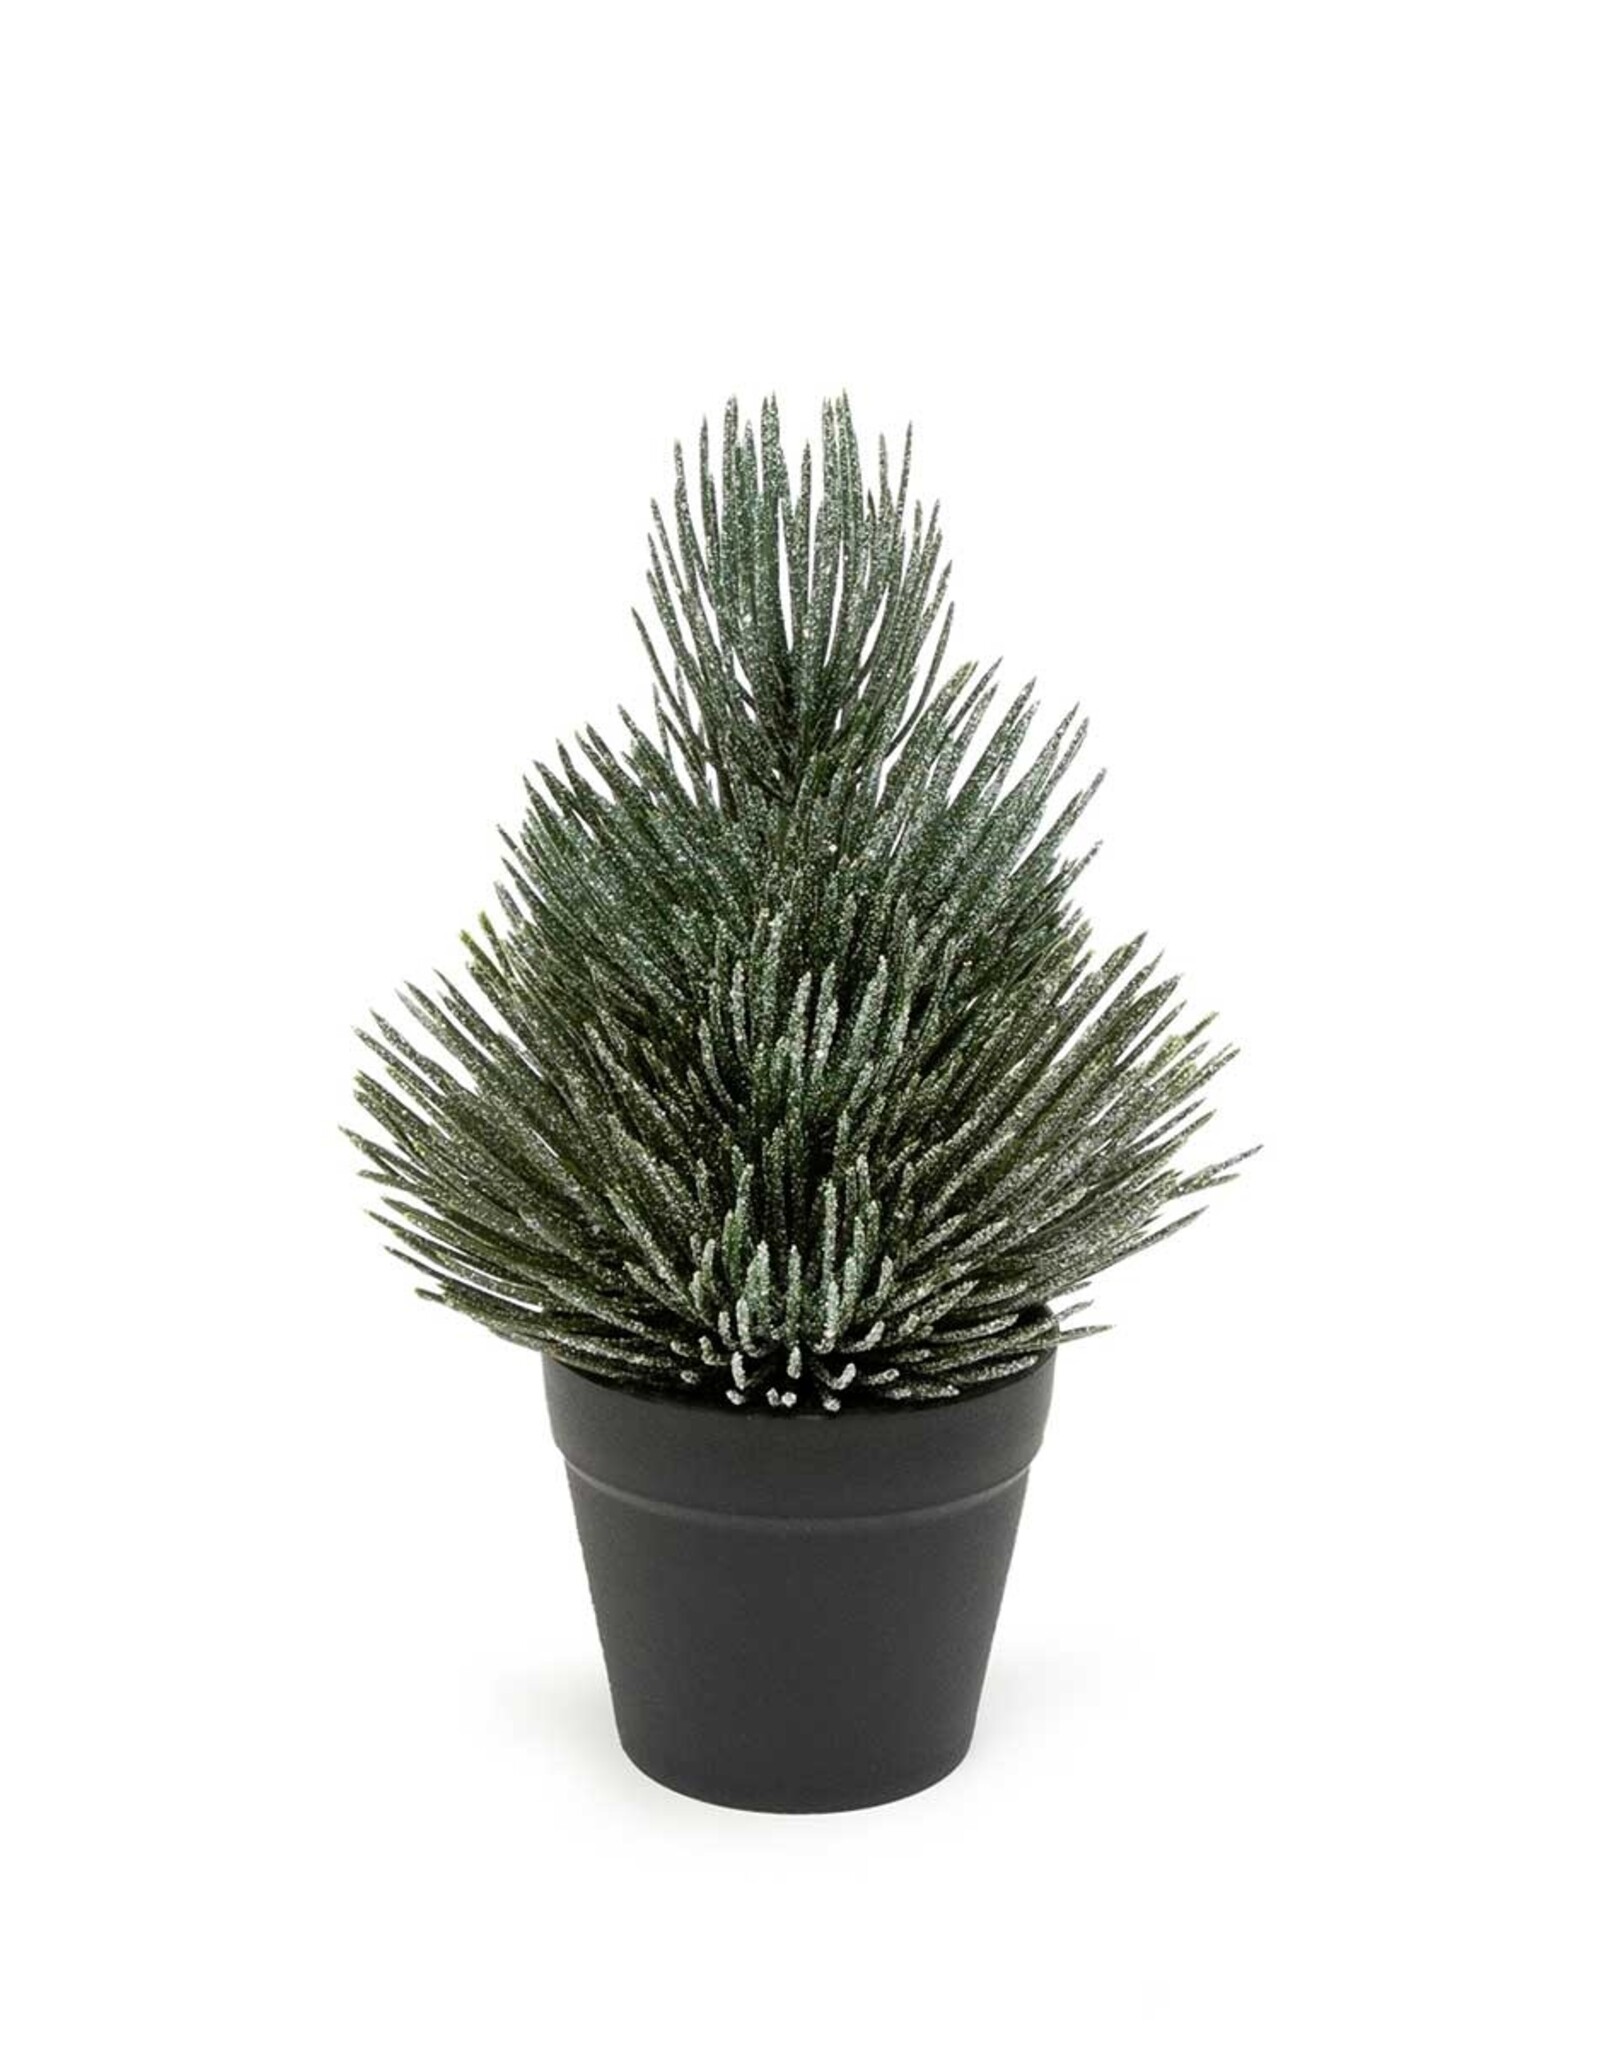 Meravic 8" Frosted Pine Tree in Pot